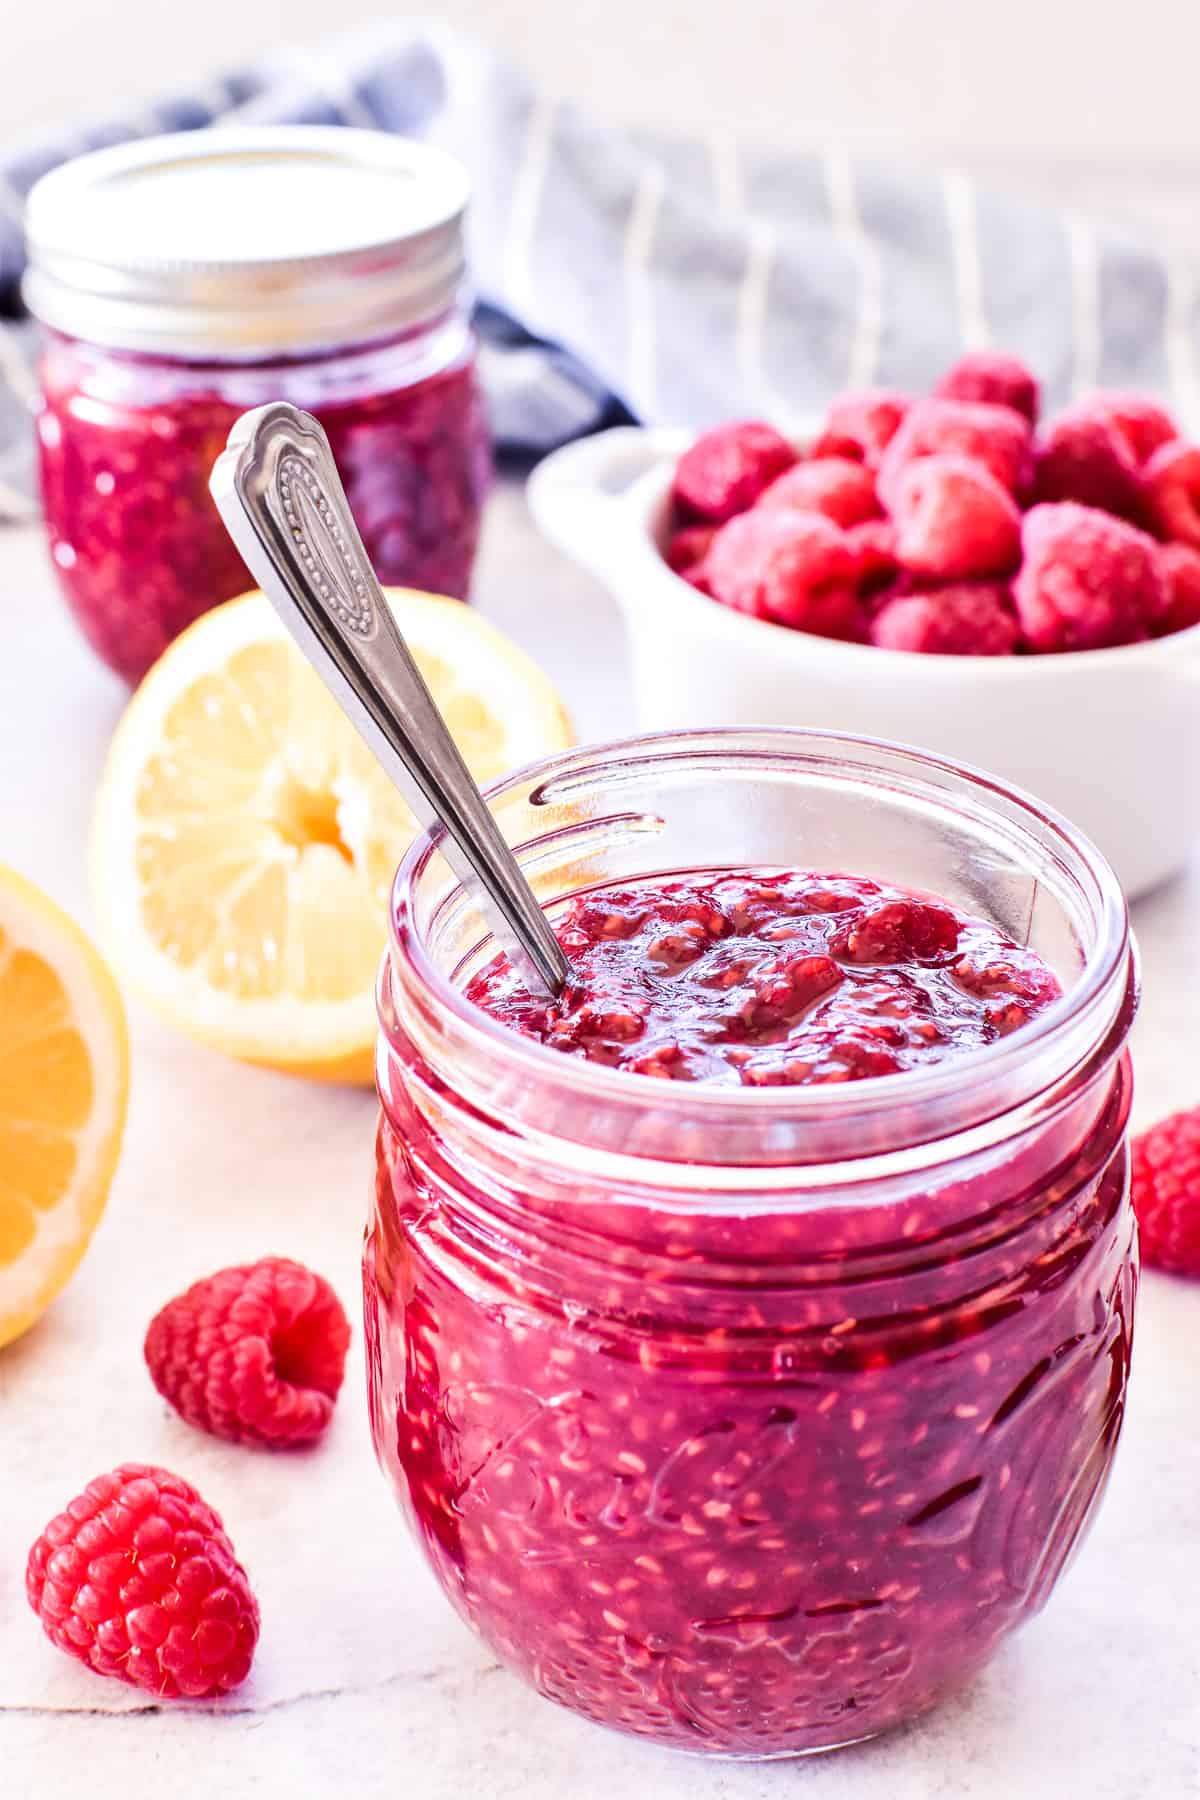 Raspberry Jam in jar with spoon and fresh ingredients in background